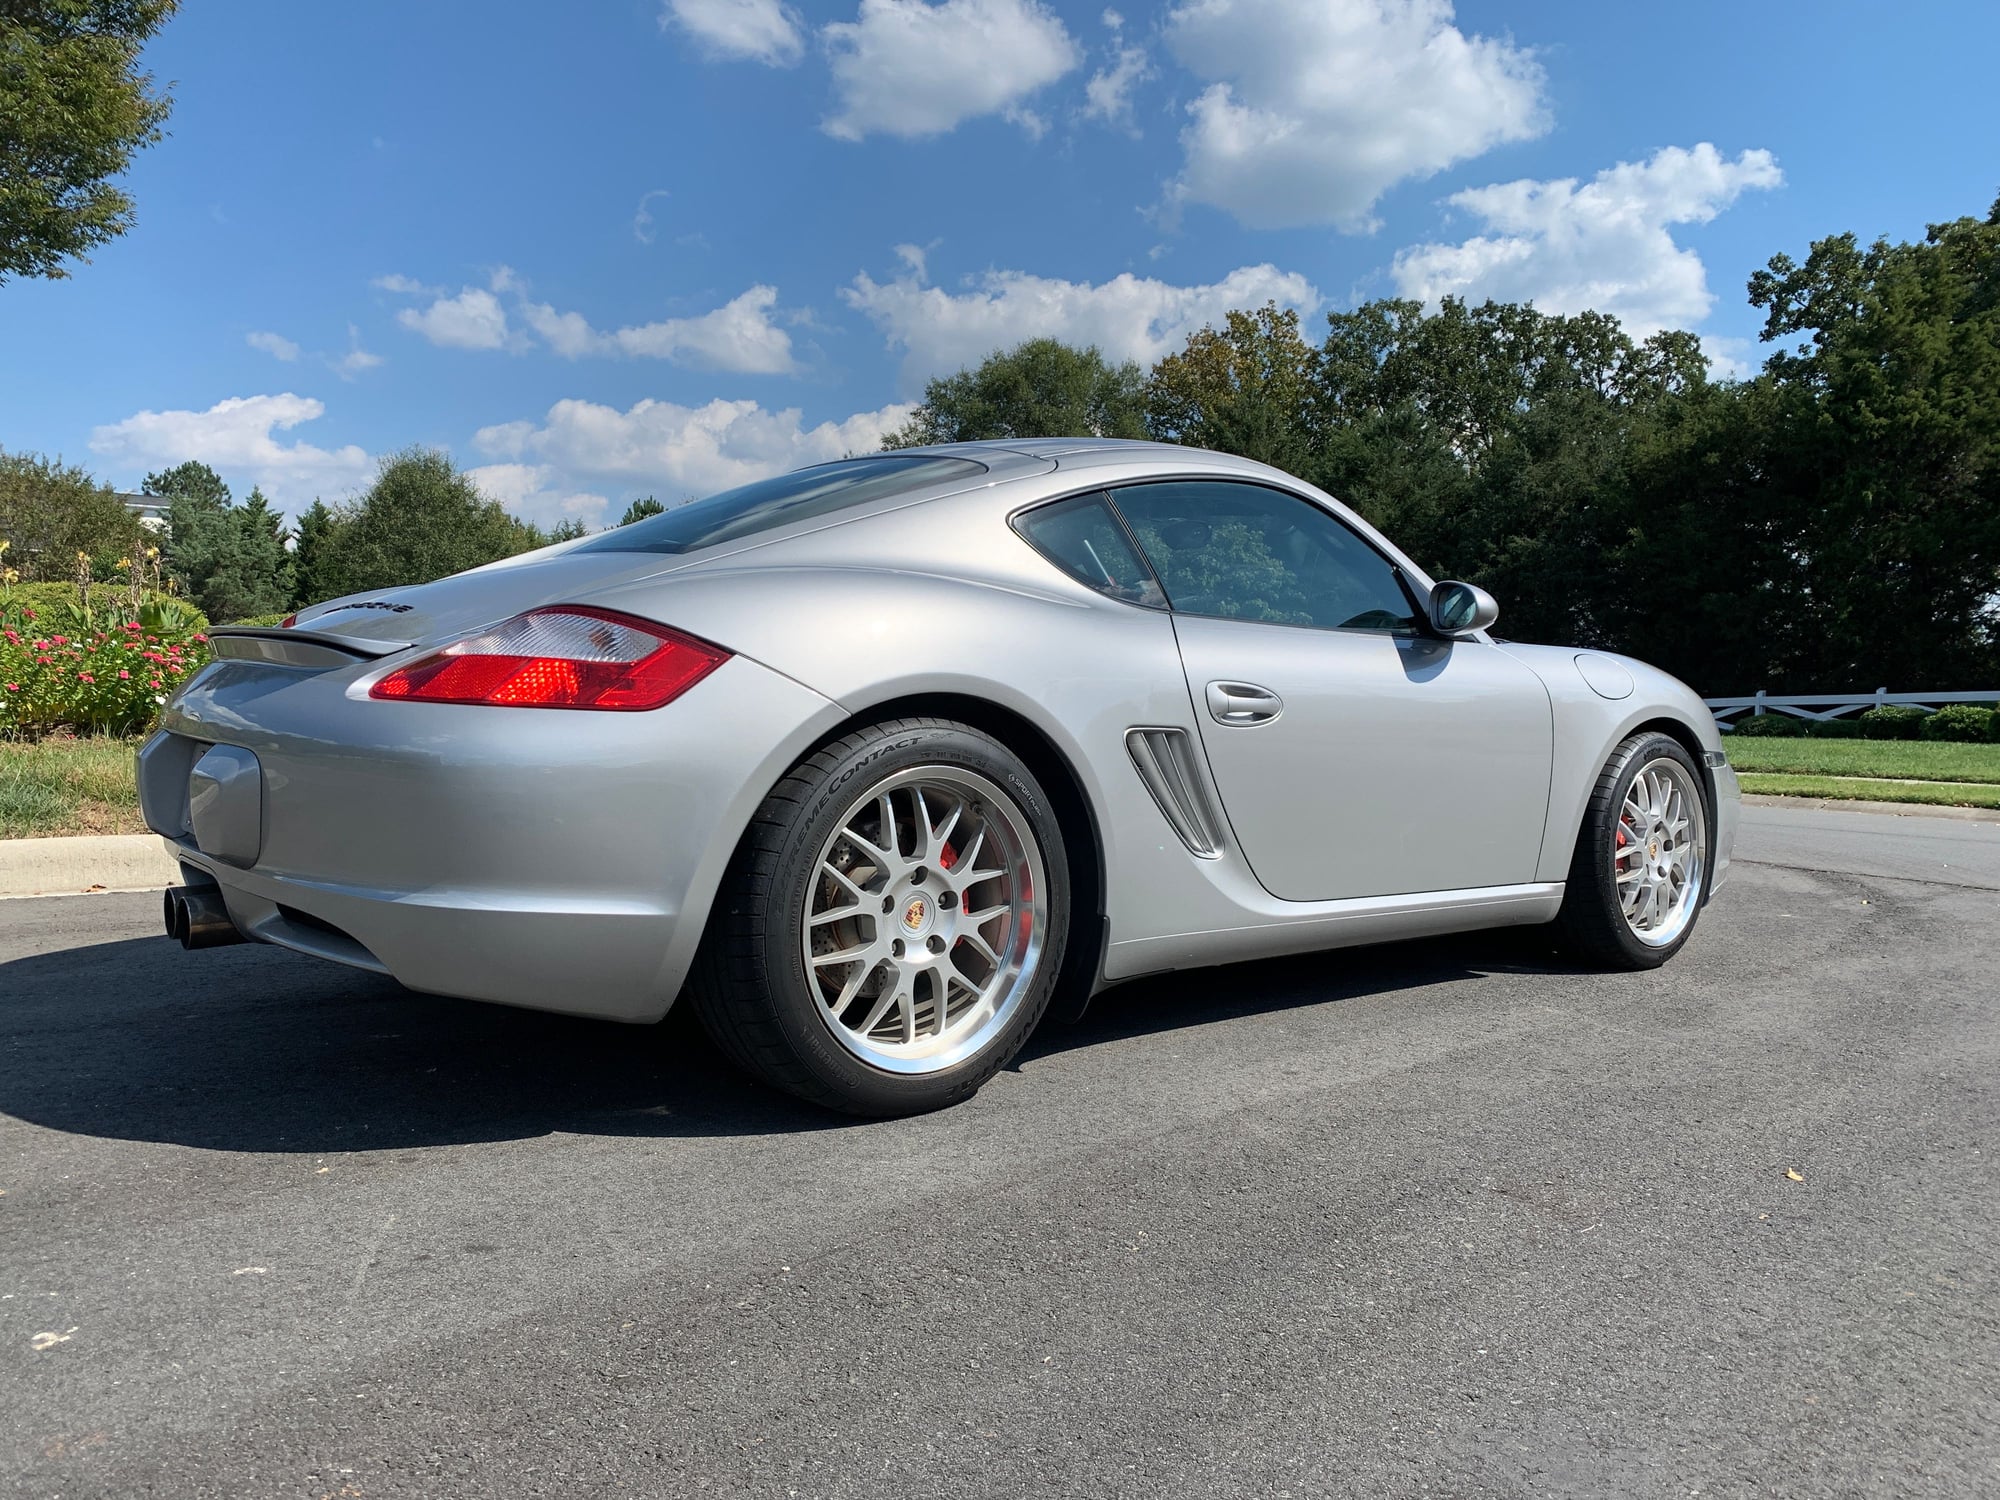 2006 Porsche Cayman - 2006 Porsche Cayman S Well Built W/ Mods For Reliability - Used - VIN WPOAB29816U780305 - 125,000 Miles - 6 cyl - 2WD - Manual - Coupe - Silver - Marvin, NC 28173, United States